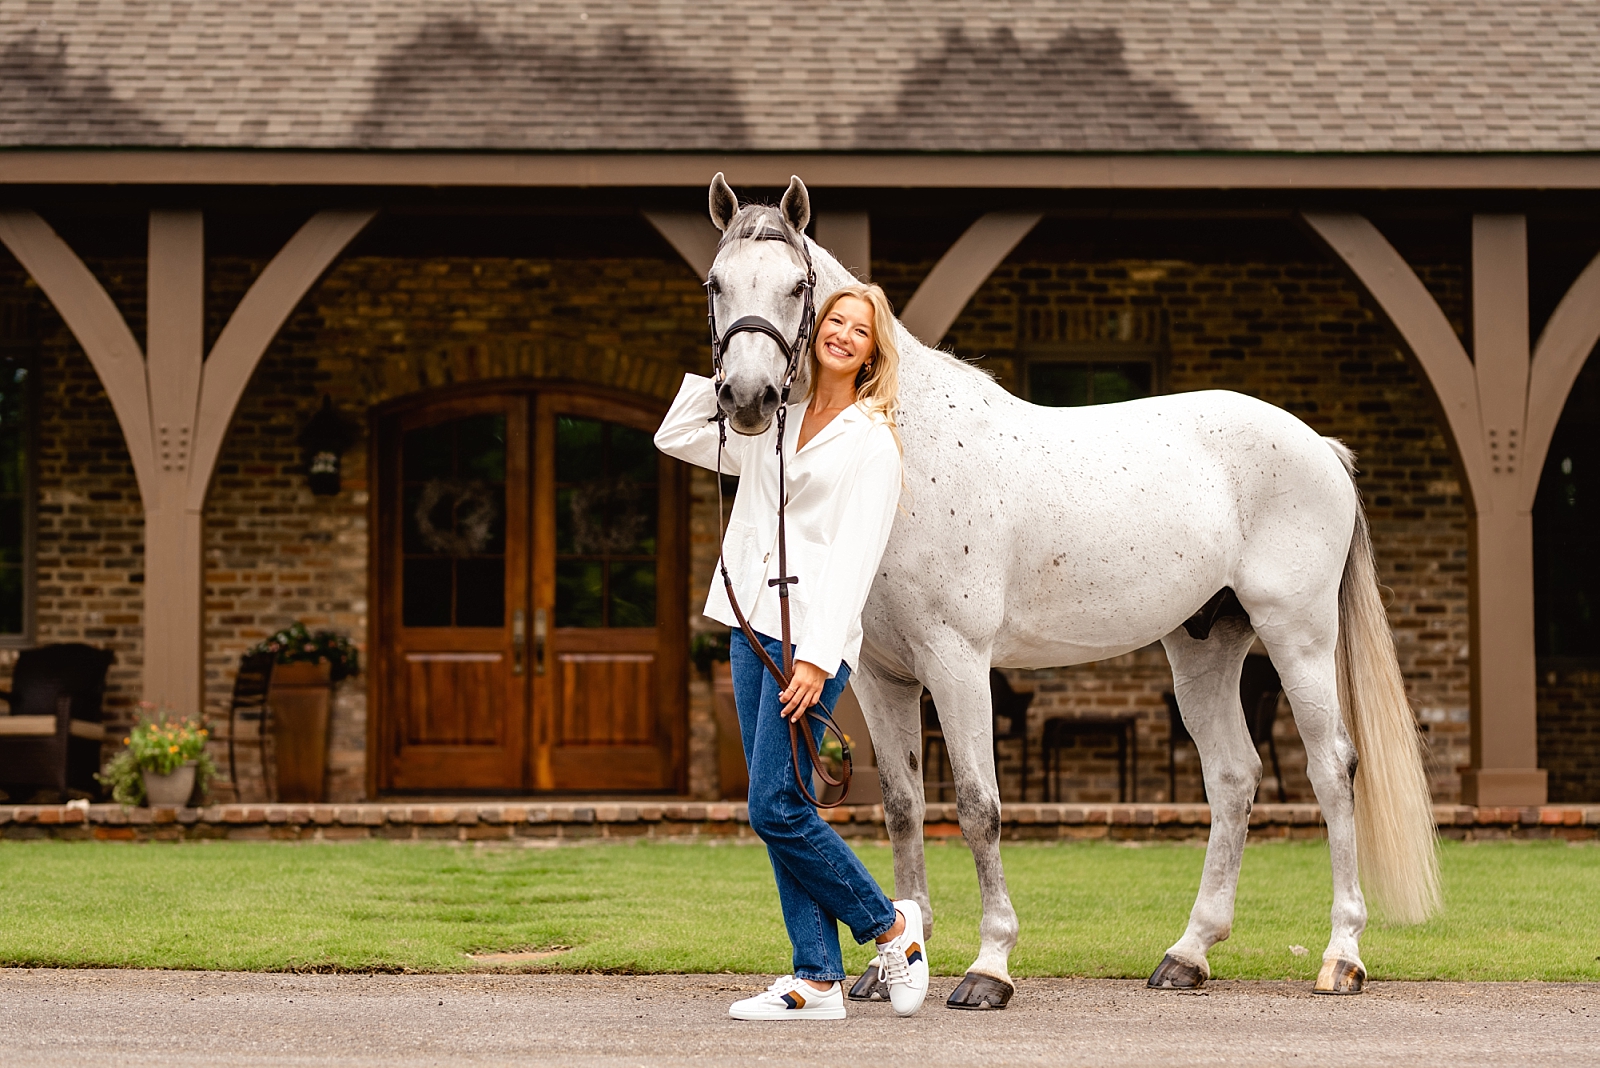 Horse photographer near Birmingham, Alabama takes photos of Dutch Warmblood and his rider at a high-end hunter/jumper facility outside of Bham.